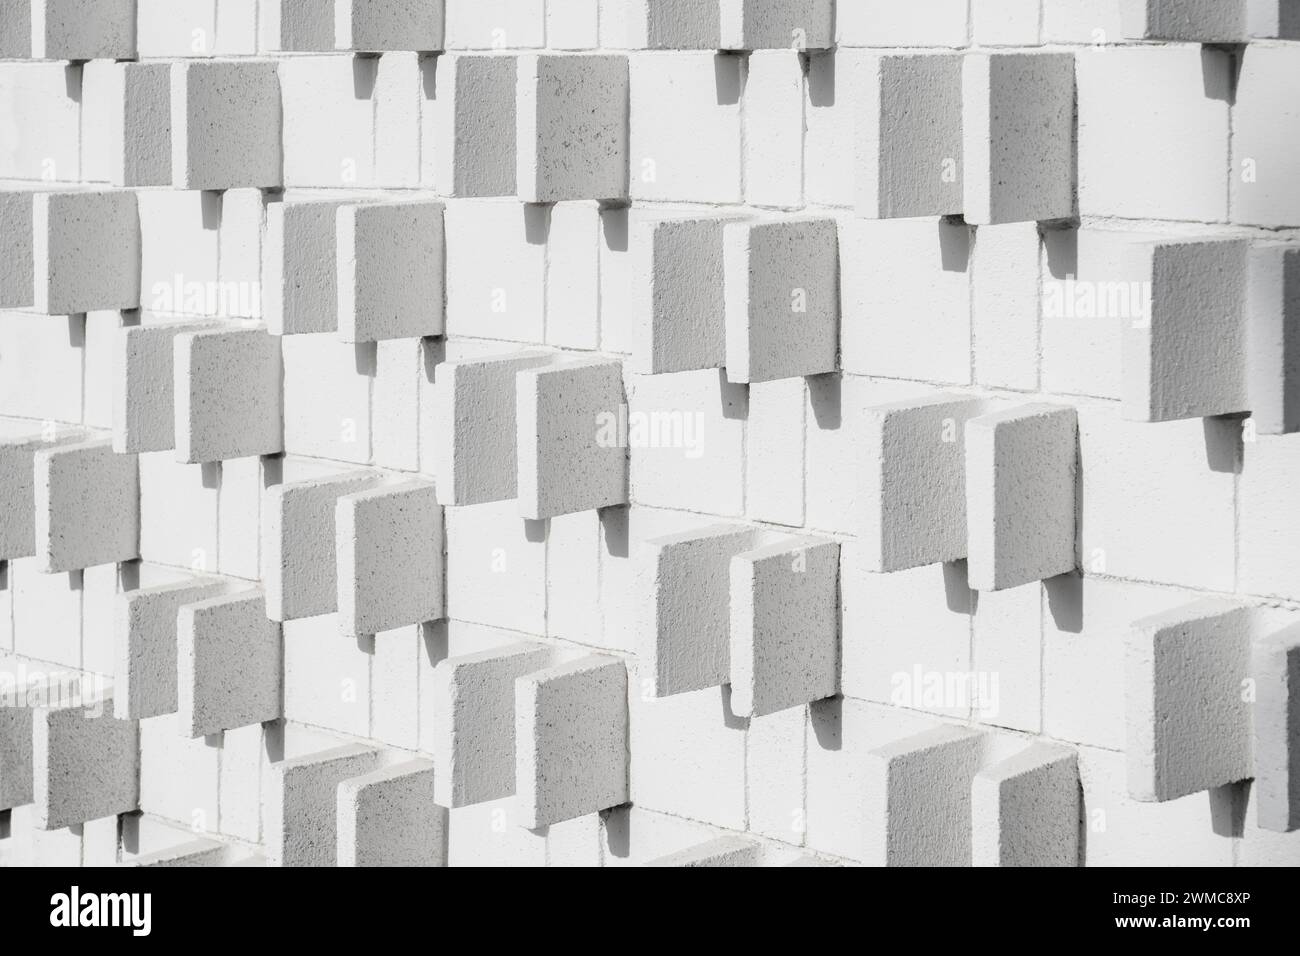 Mid-century modern exterior block wall pattern and texture with shadows Stock Photo